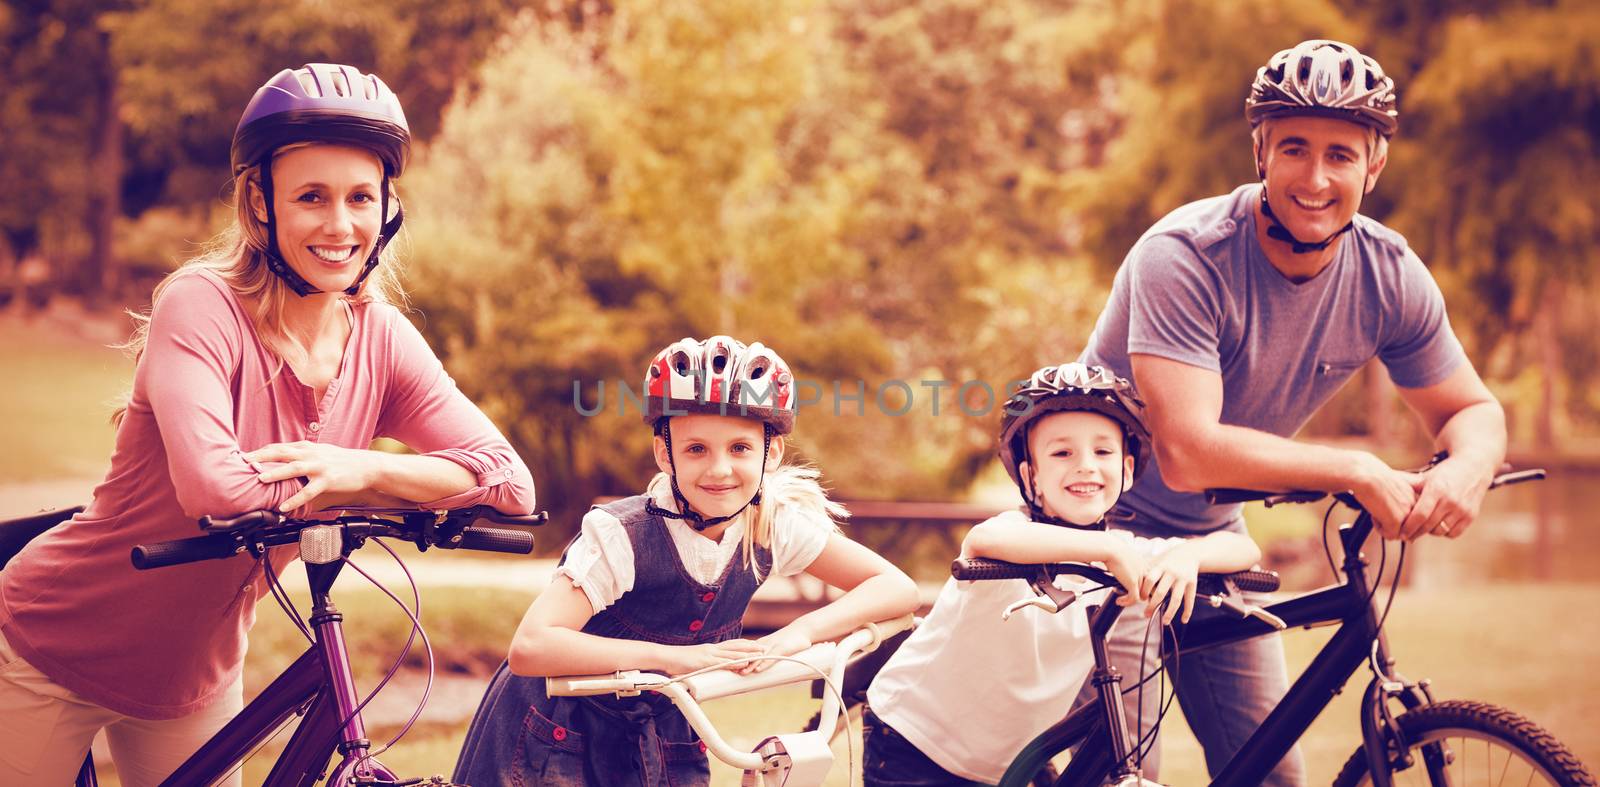 Portrait of happy family on bicycle at park